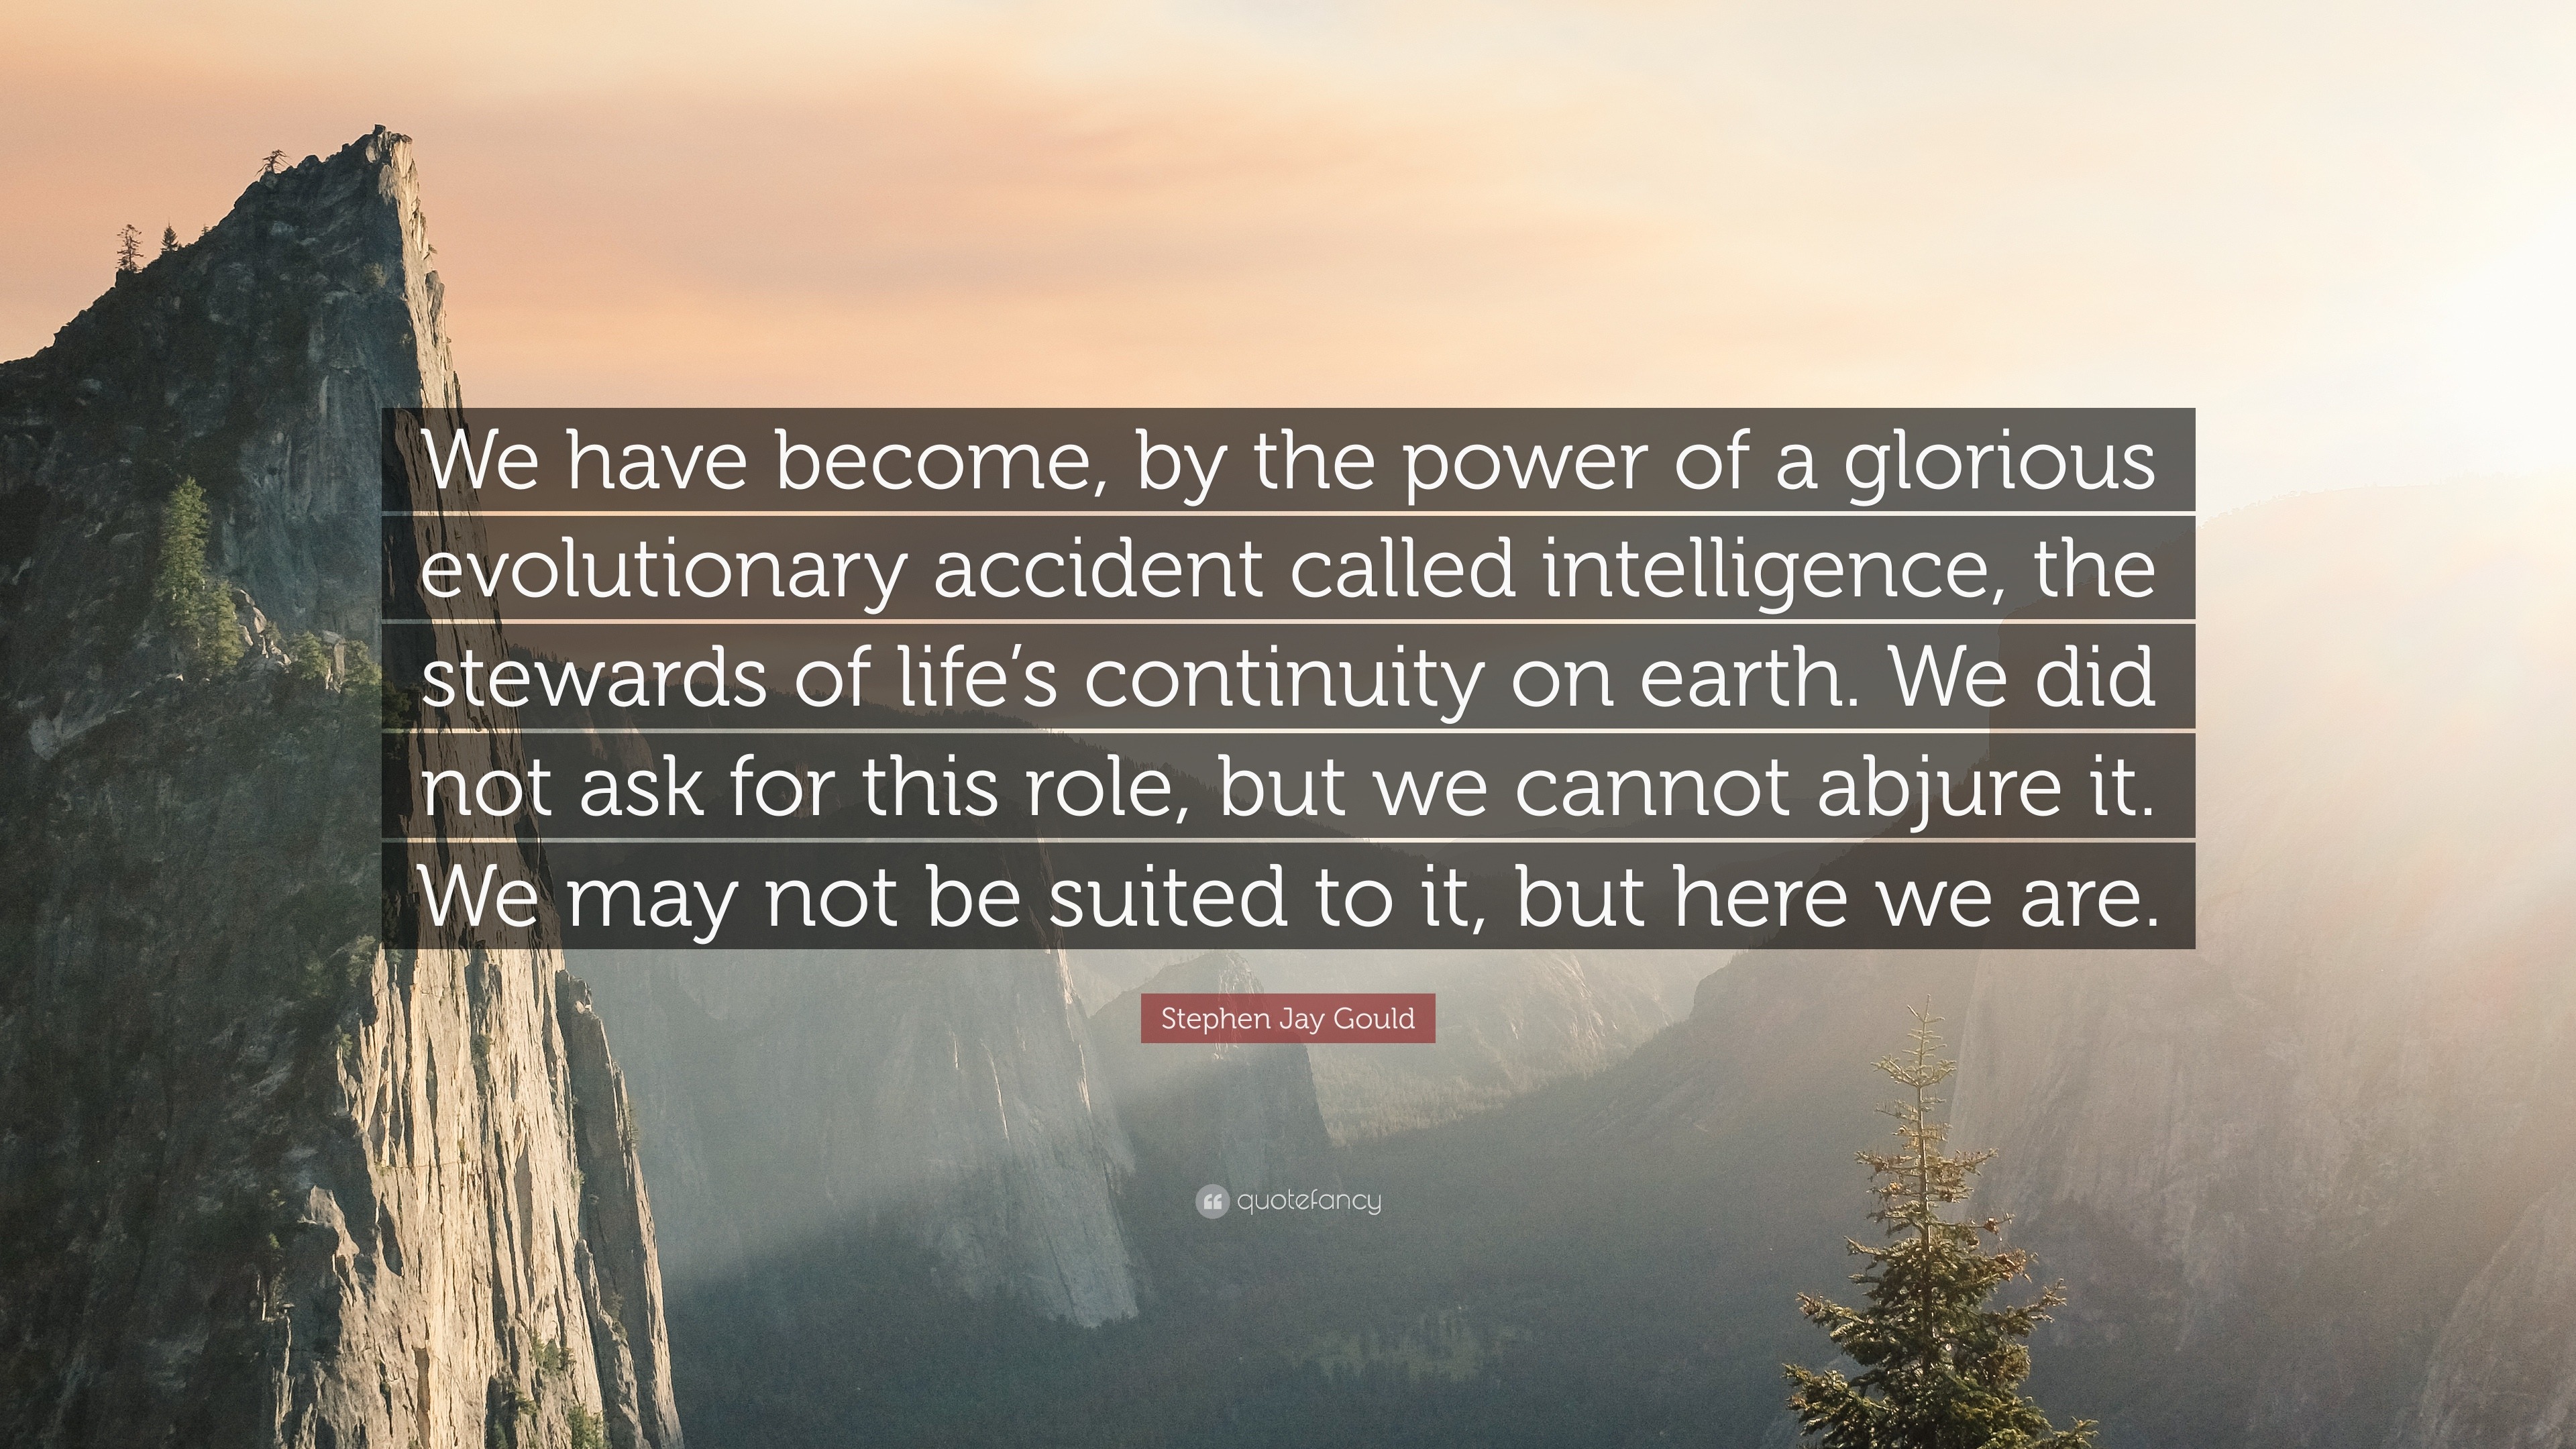 Stephen Jay Gould Quote: “We have become, by the power of a glorious ...